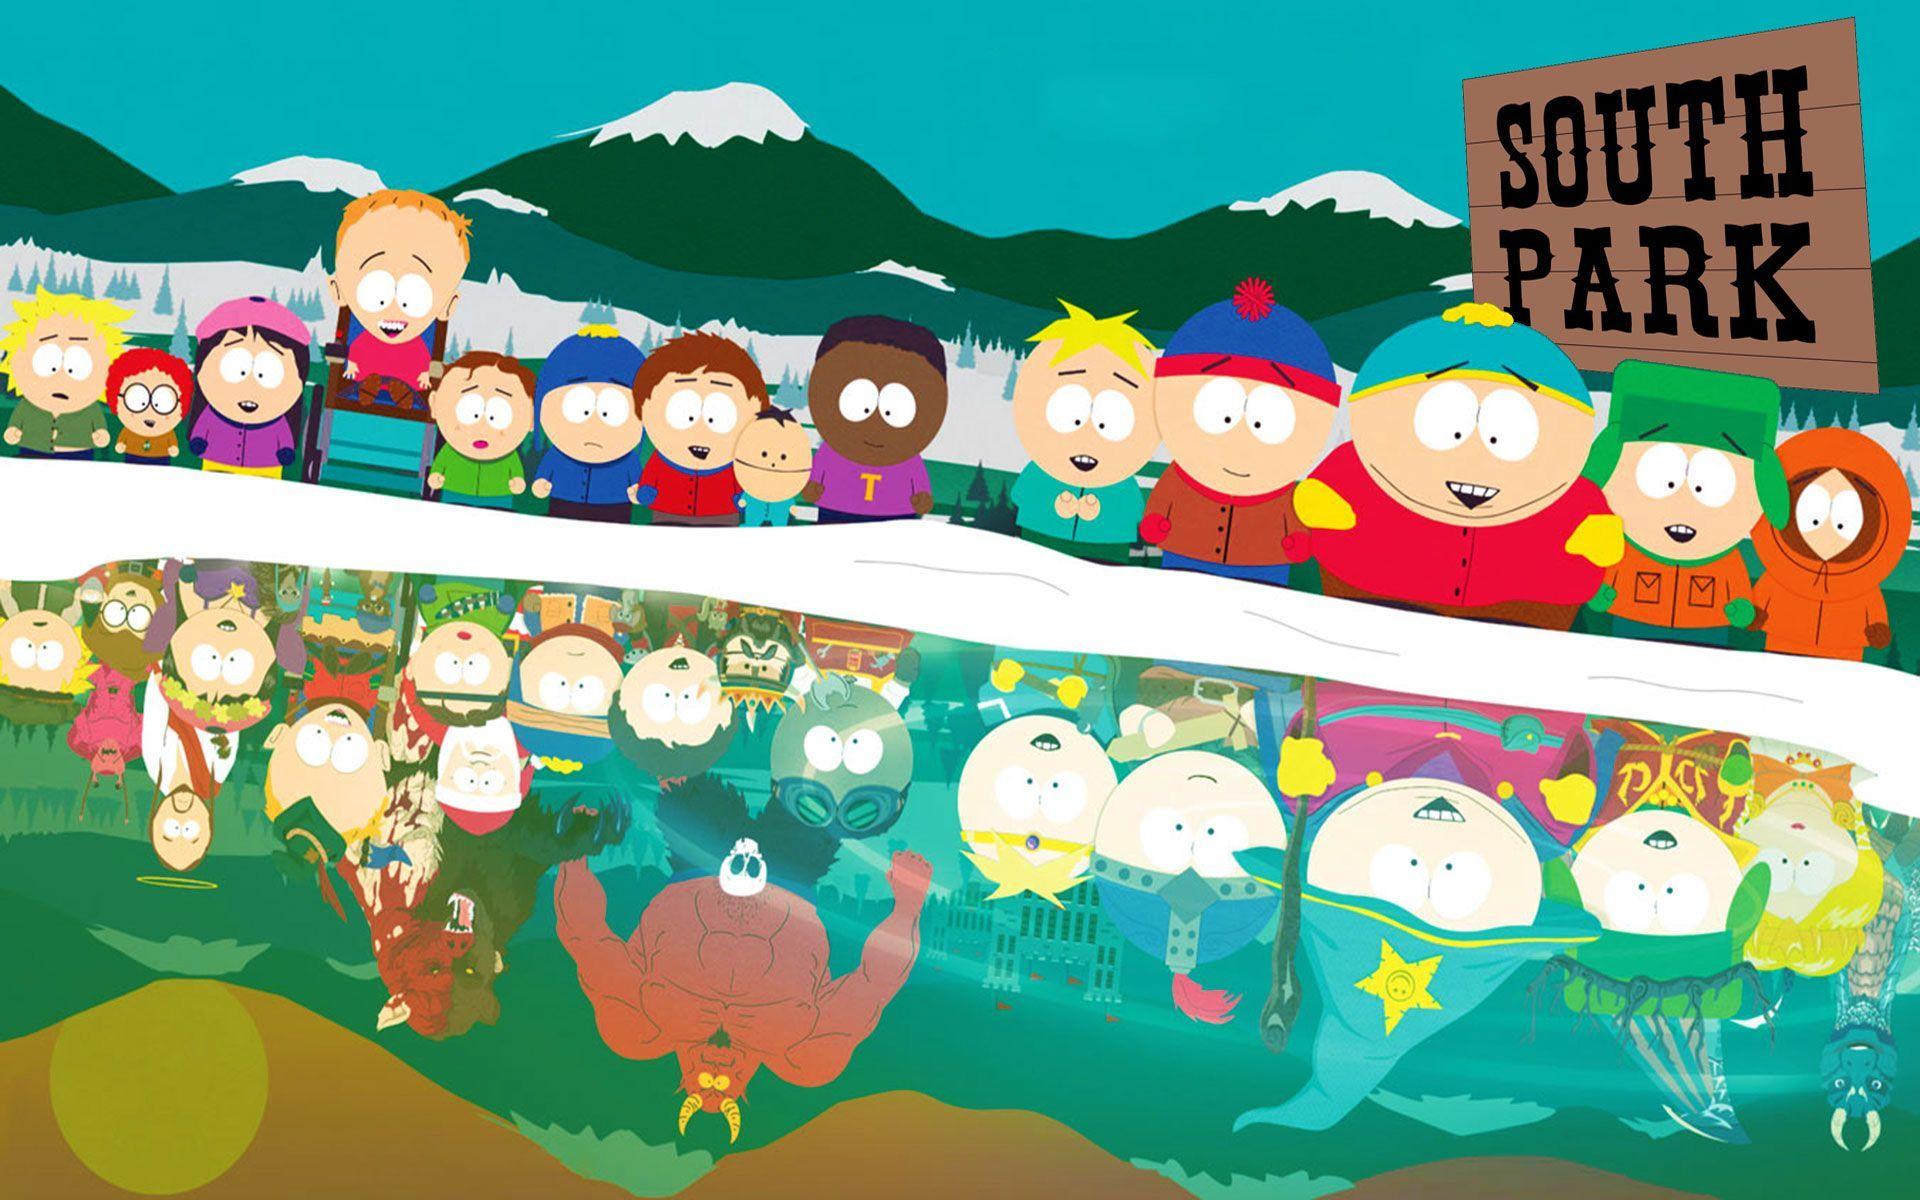 South Park  Ike cartoon  themeworld  Free Download Borrow and  Streaming  Internet Archive